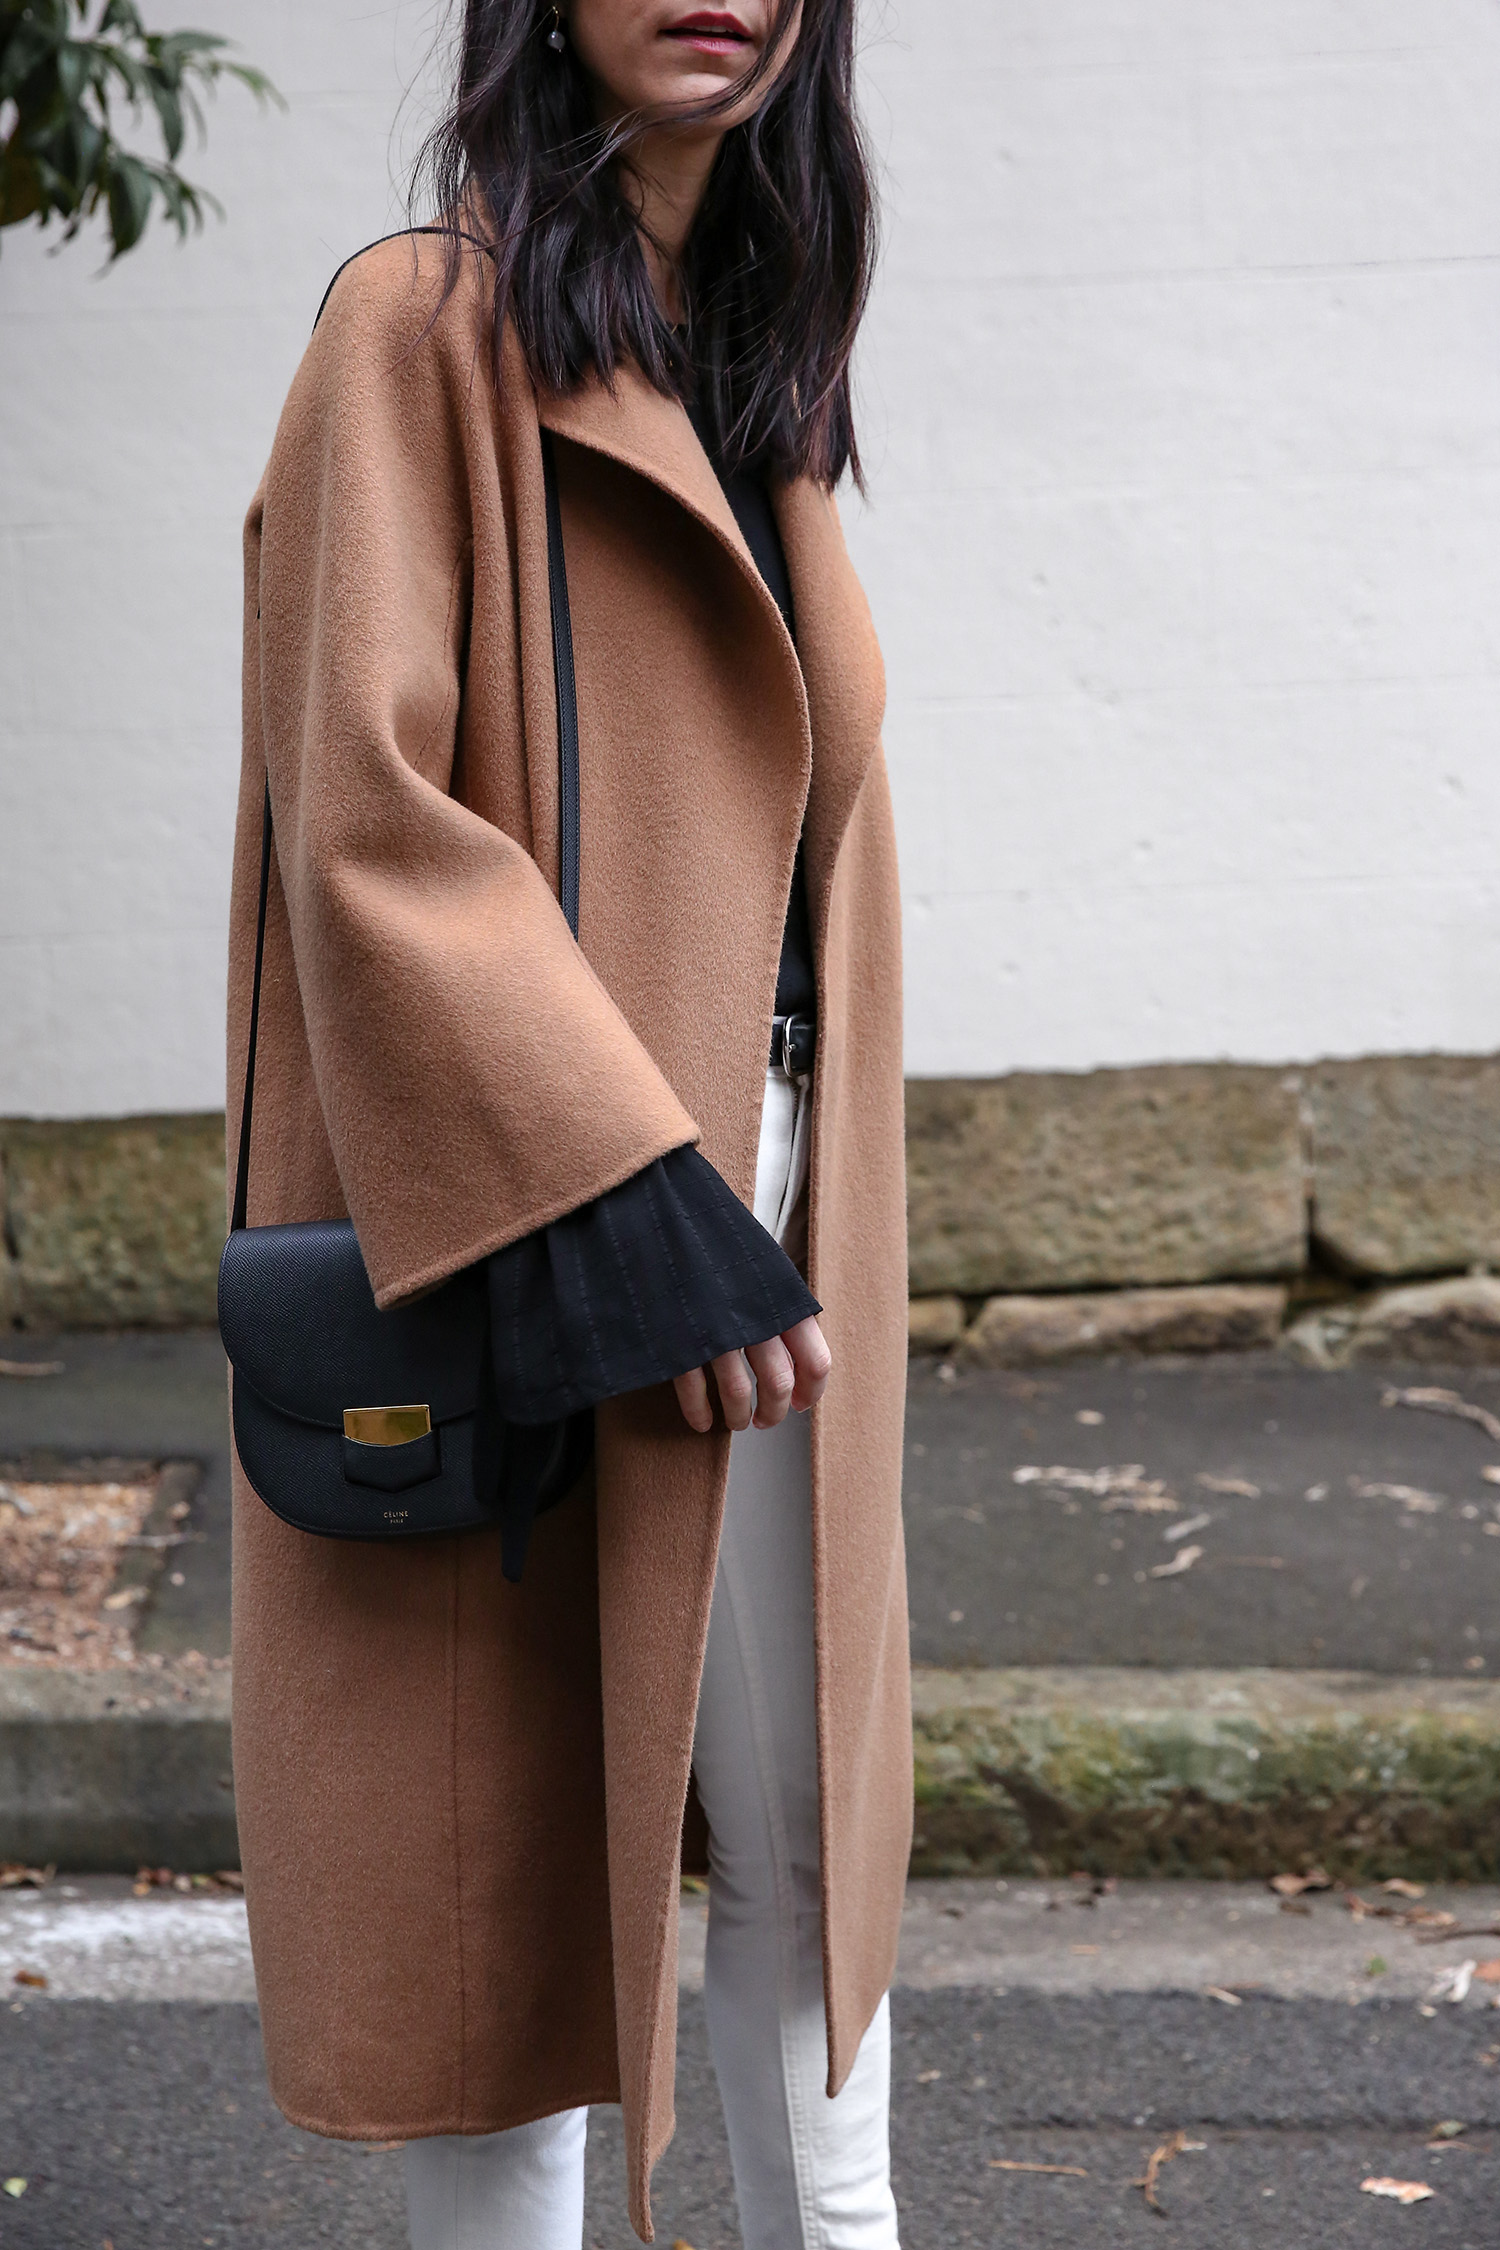 Jamie Lee of Mademoiselle wearing a Scandi style outfit and a The Curated camel wrap coat